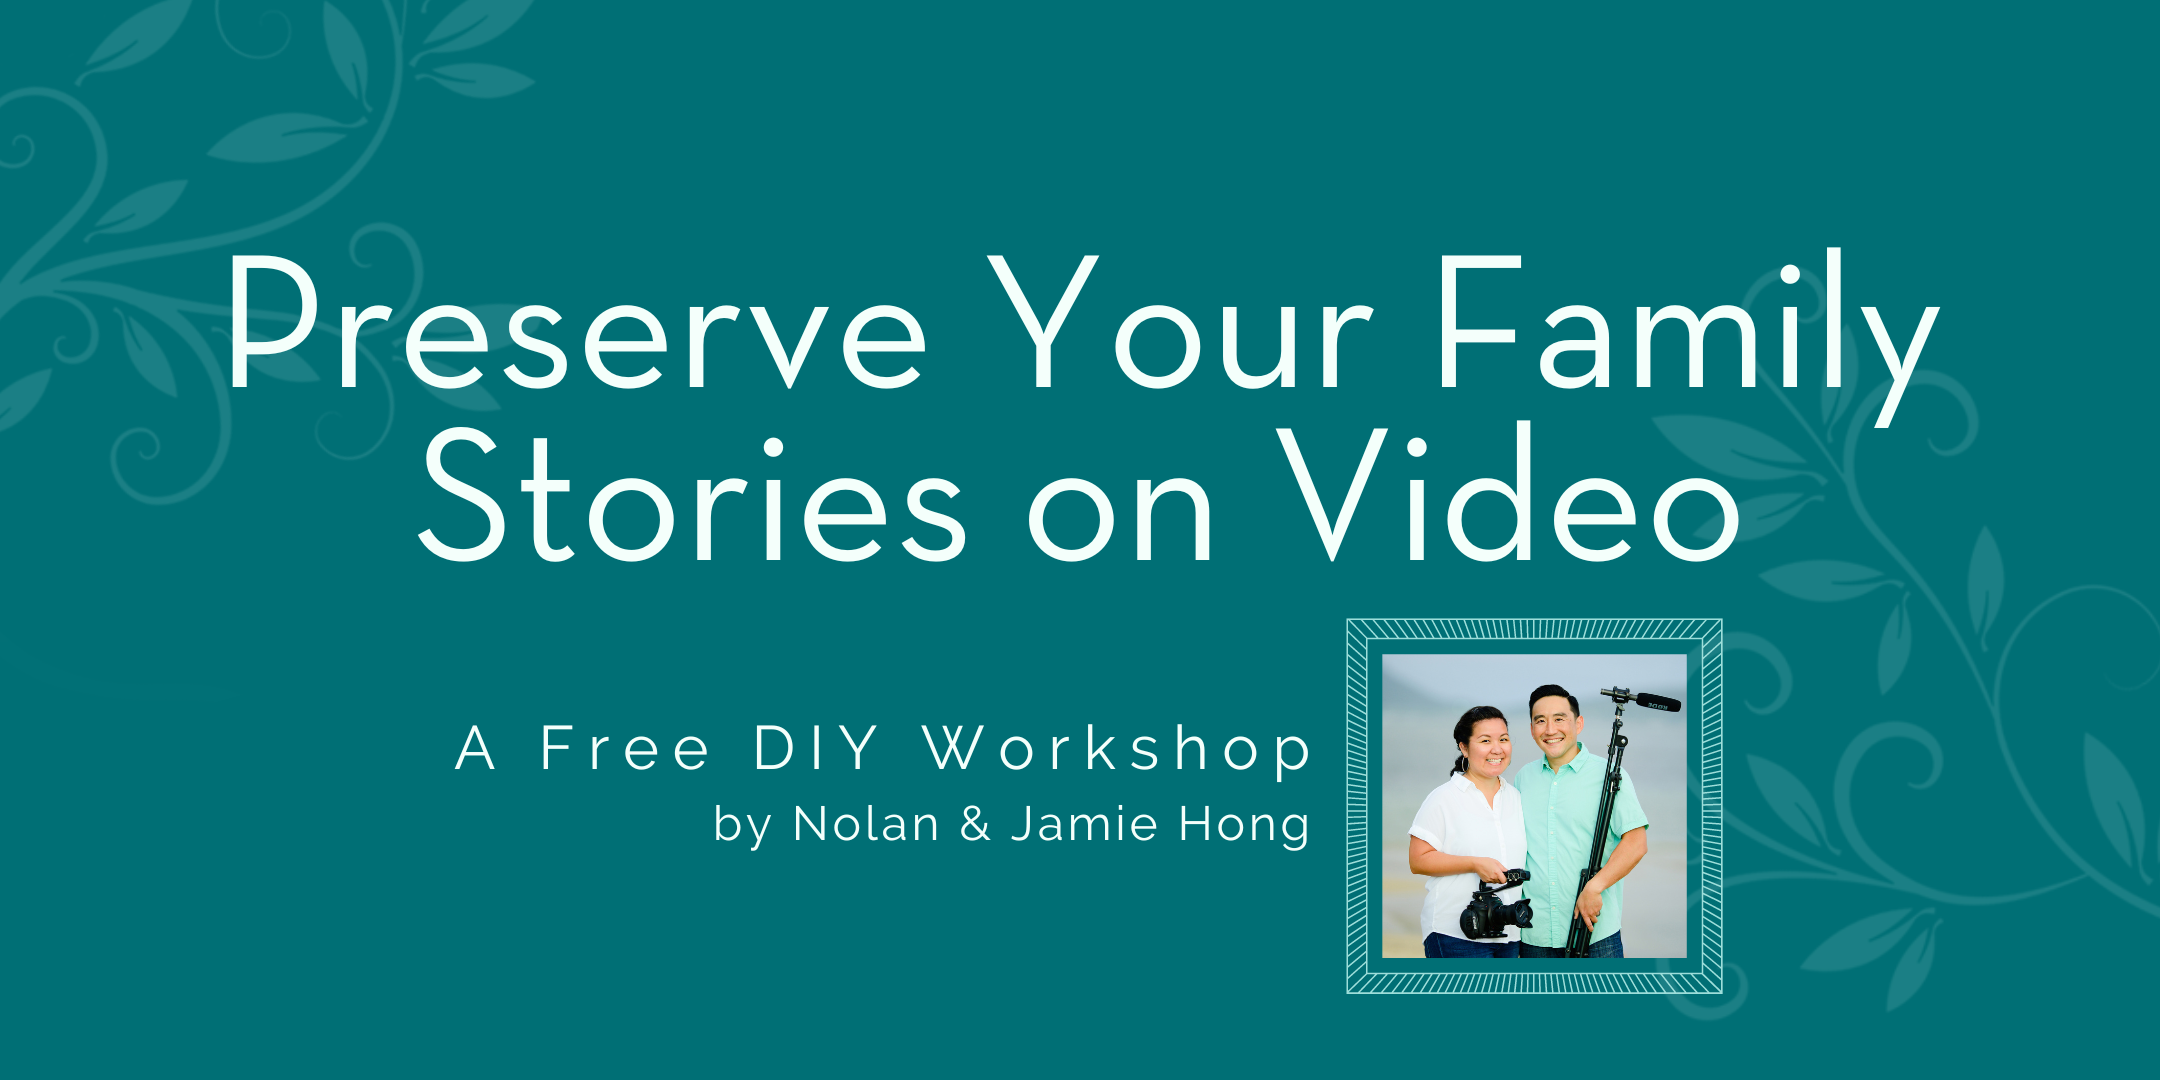 Preserve Your Family Stories on Video, a free DIY workshop by Nolan and Jamie Hong